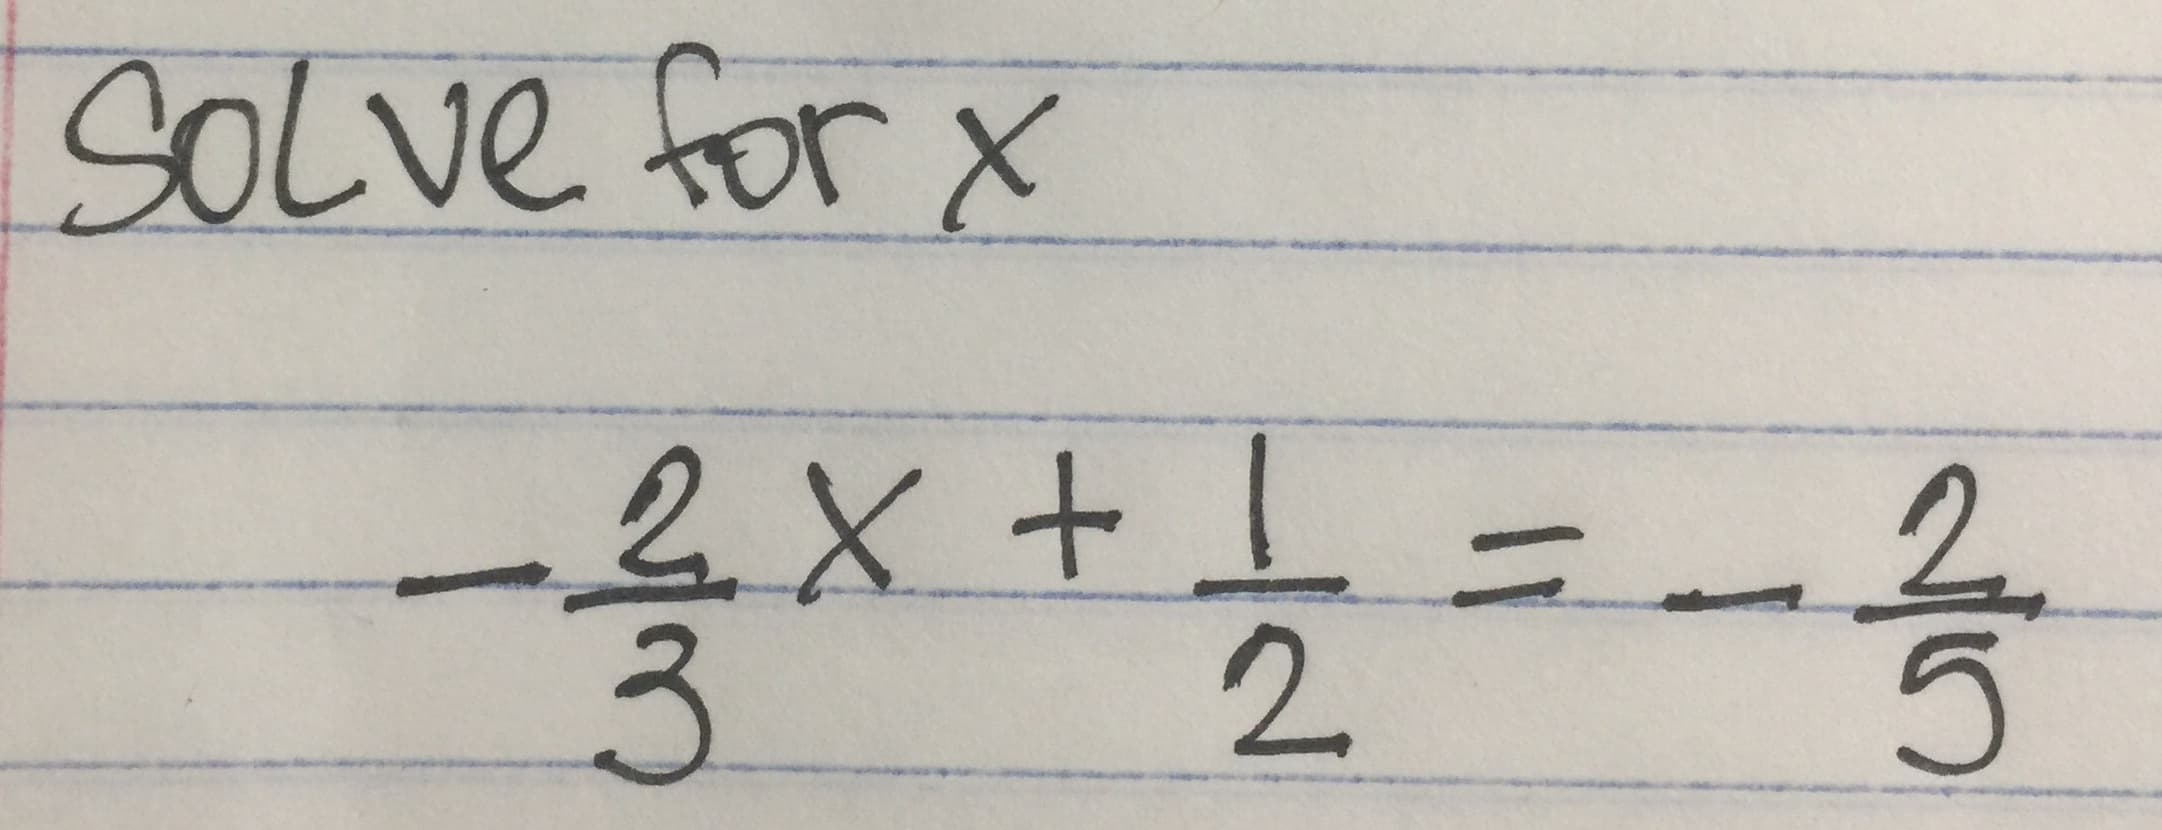 Solve for x
-2X +L
3
2.
